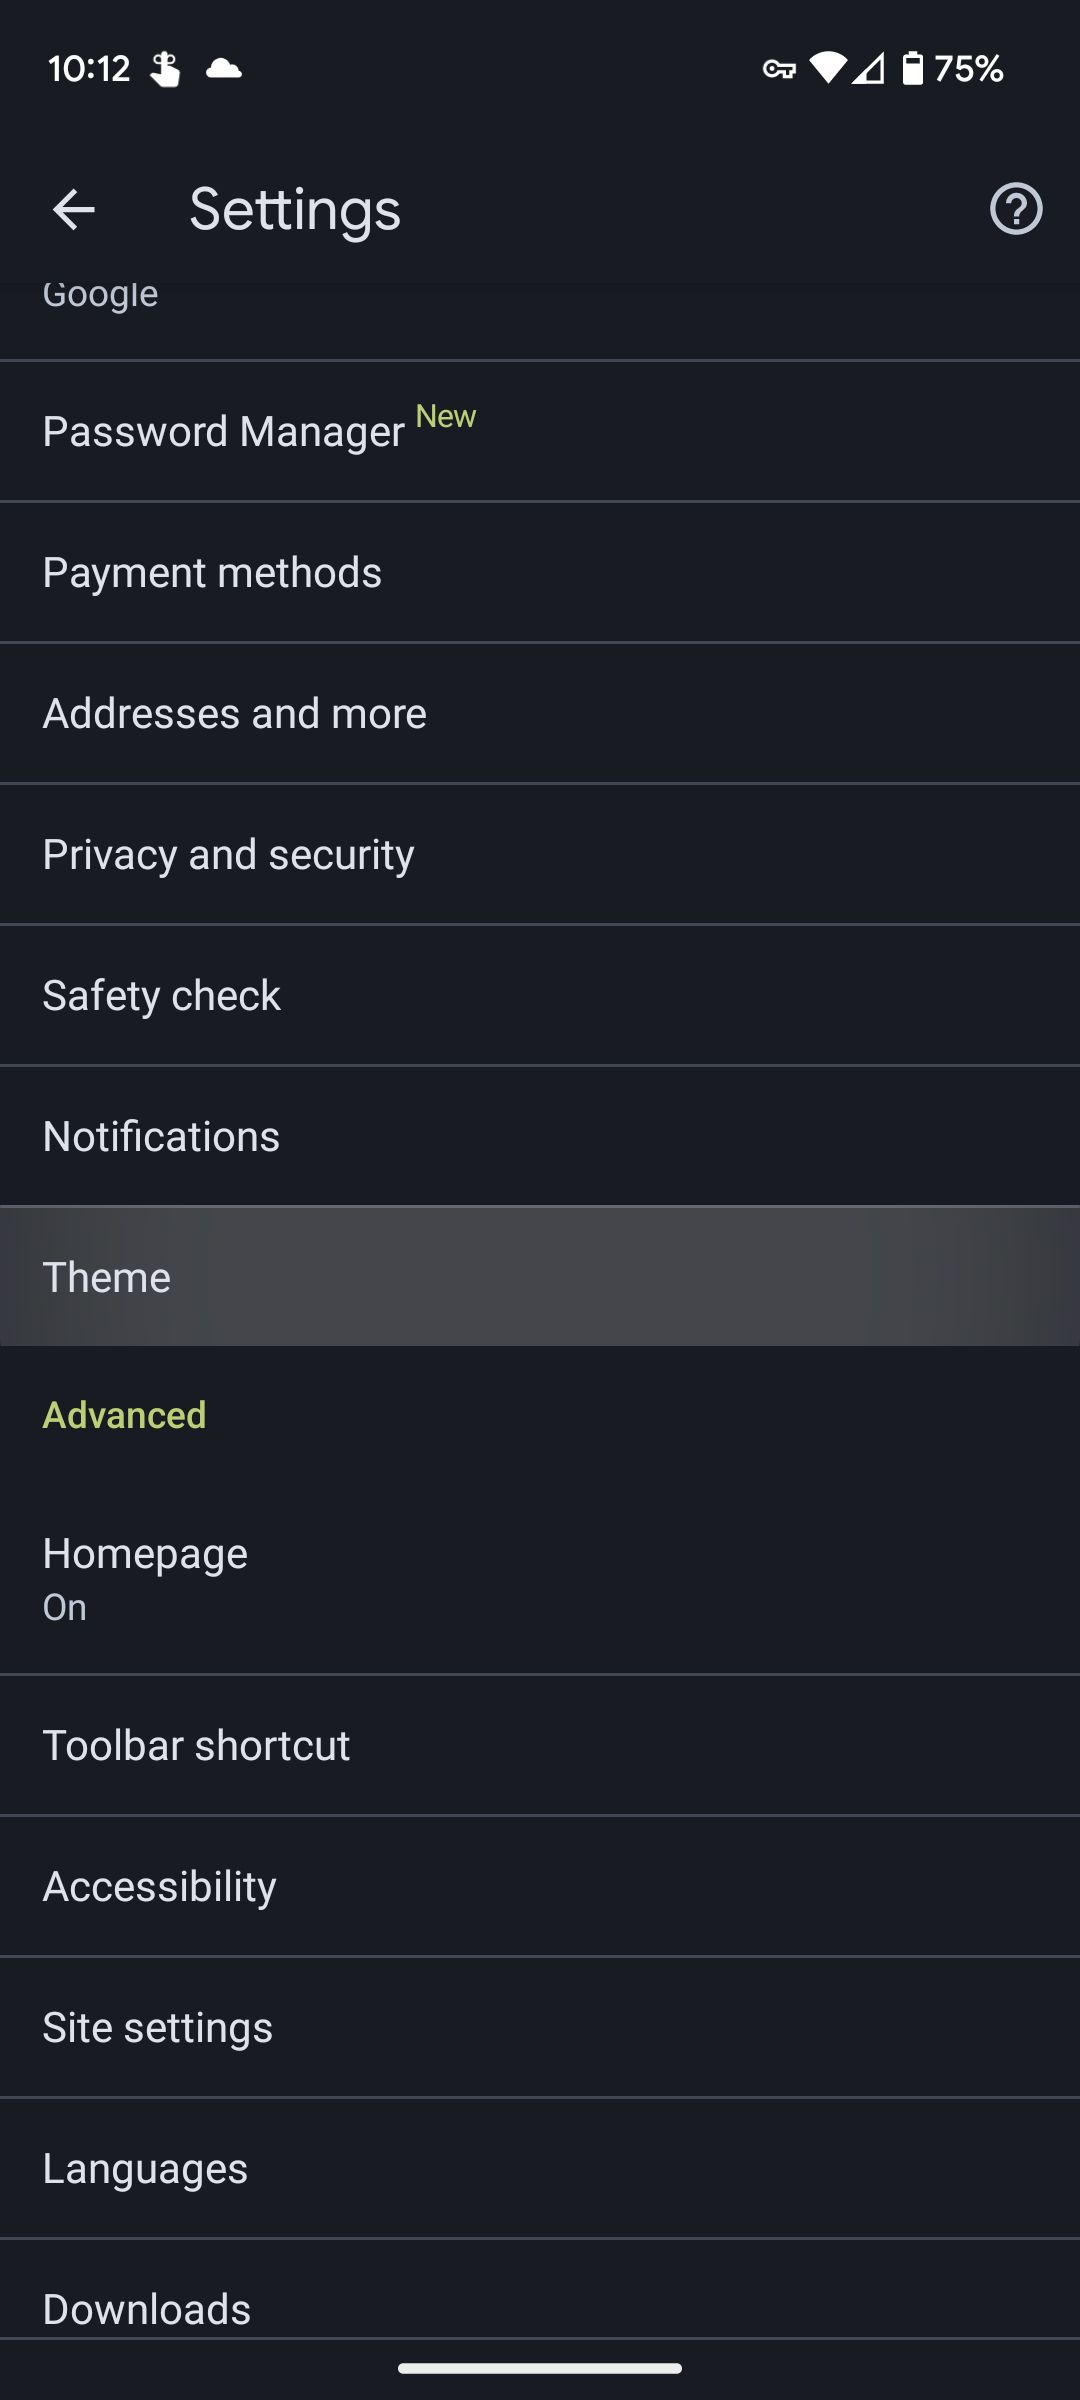 The Chrome app Settings menu with the Theme option highlighted